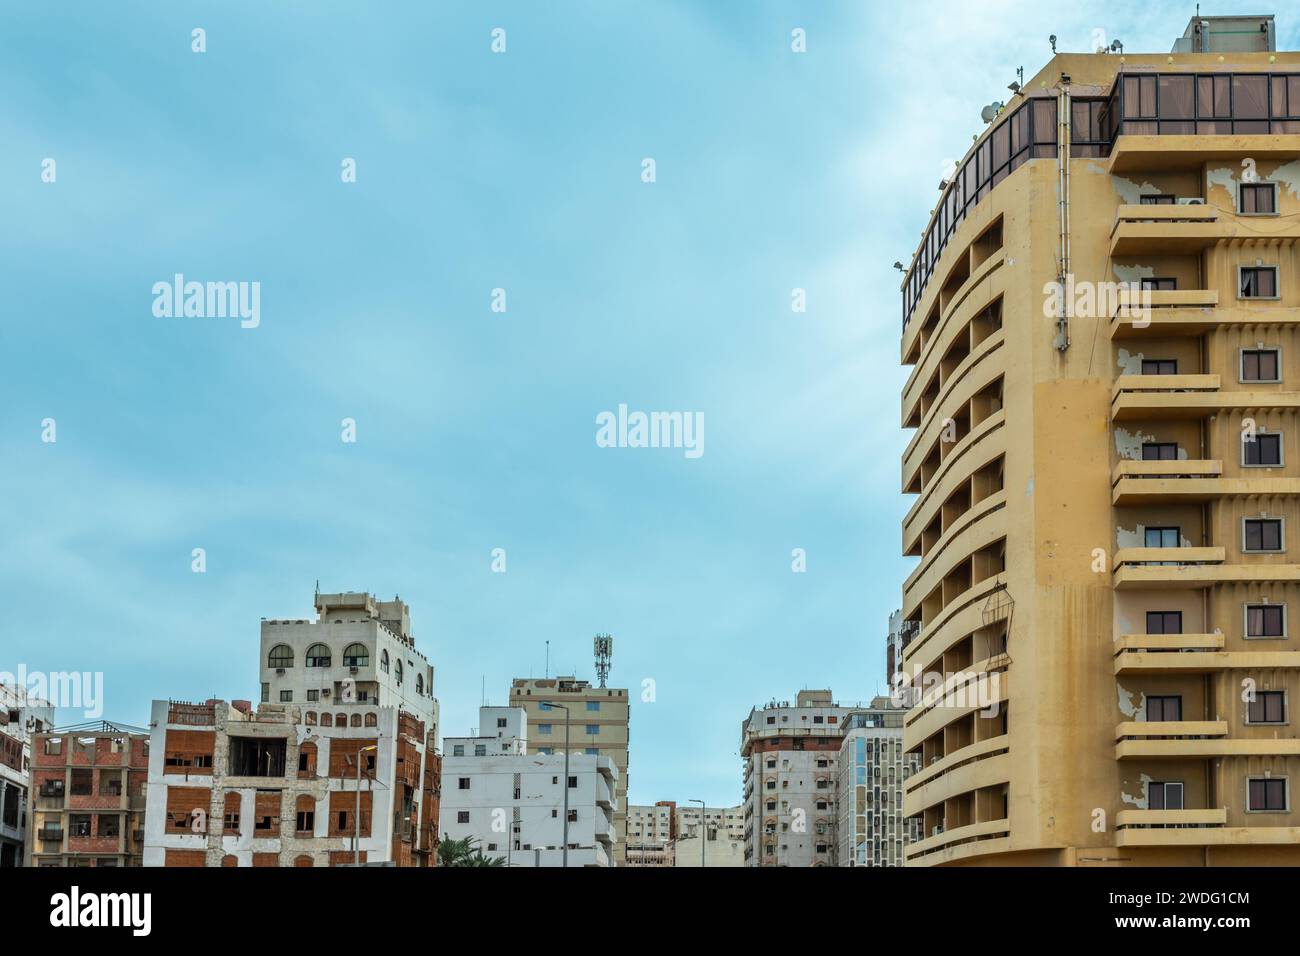 Residential buildings of Al-Balad, downtown central district of Jeddah, Saudi Arabia Stock Photo